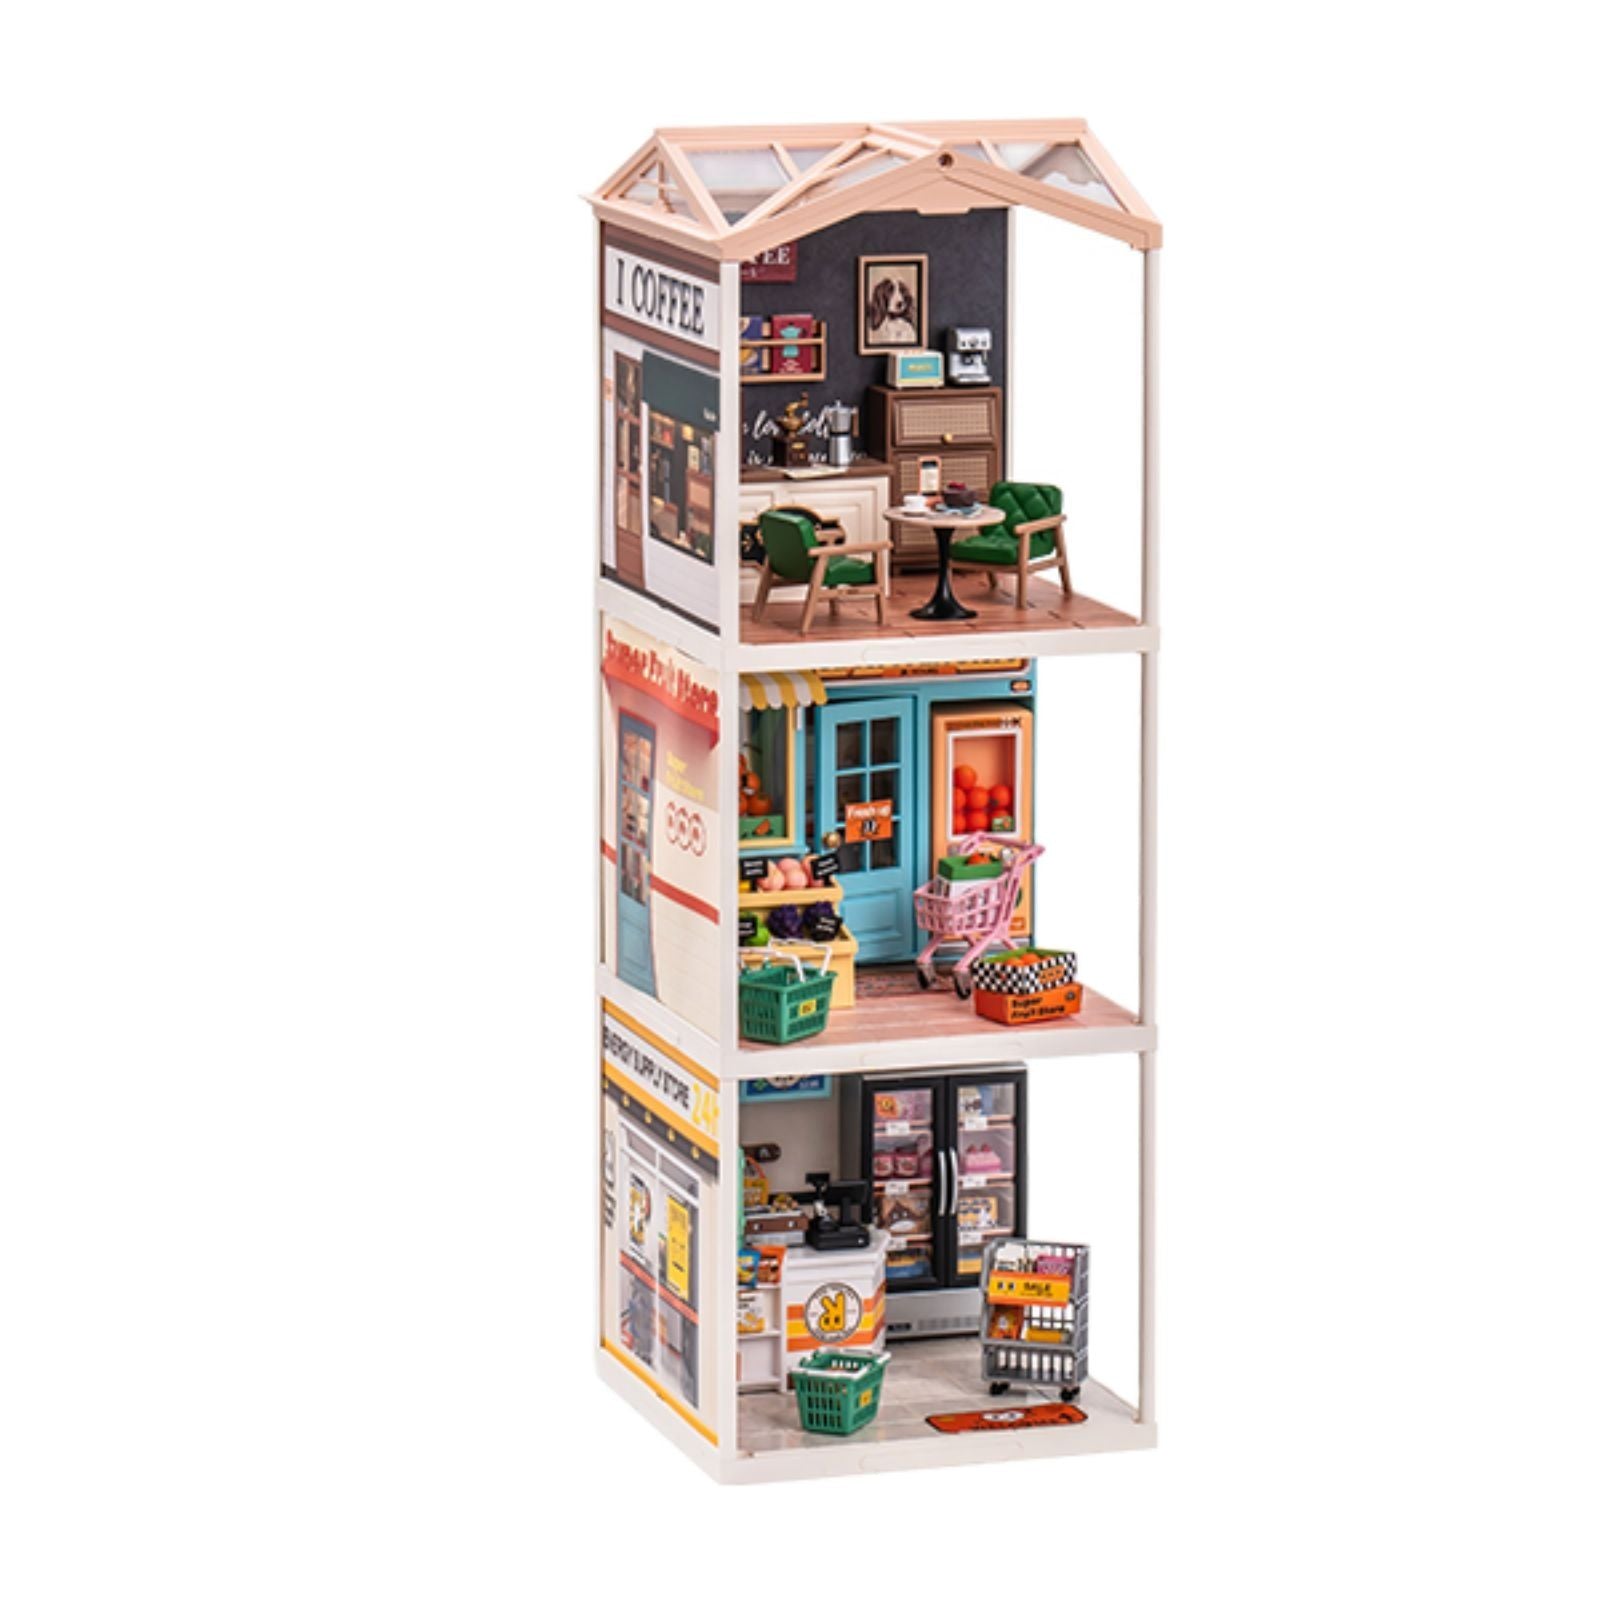 Robotime Rolife 3D Puzzle Kit Build Your Own Golden Wheat Bakery a Charming and Intricate DIY Miniature House Set for Kids Adult